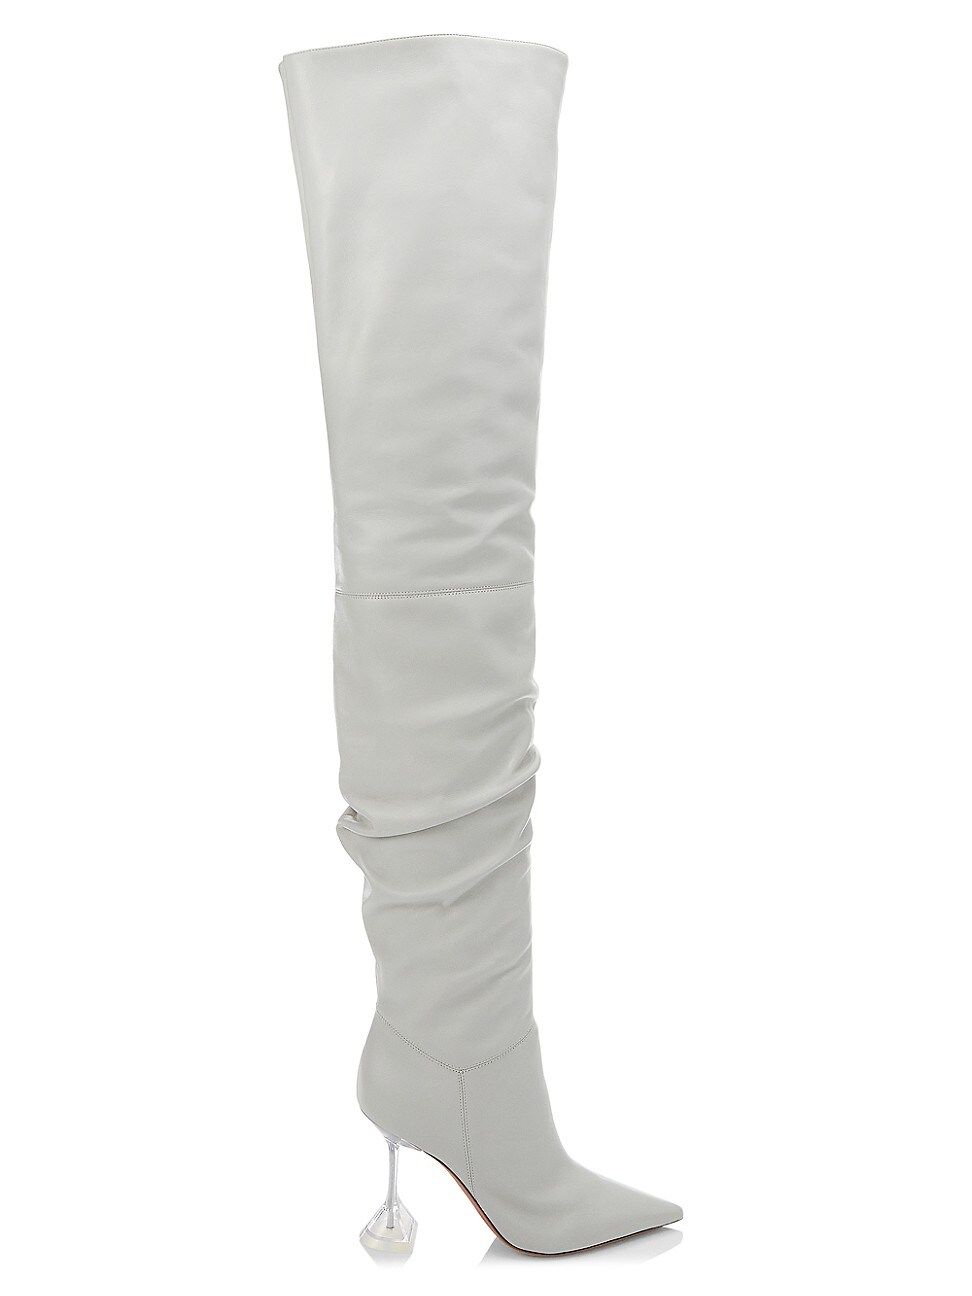 Amina Muaddi Women's Olivia Thigh-High Leather Boots - Deep Off White - Size 6 | Saks Fifth Avenue